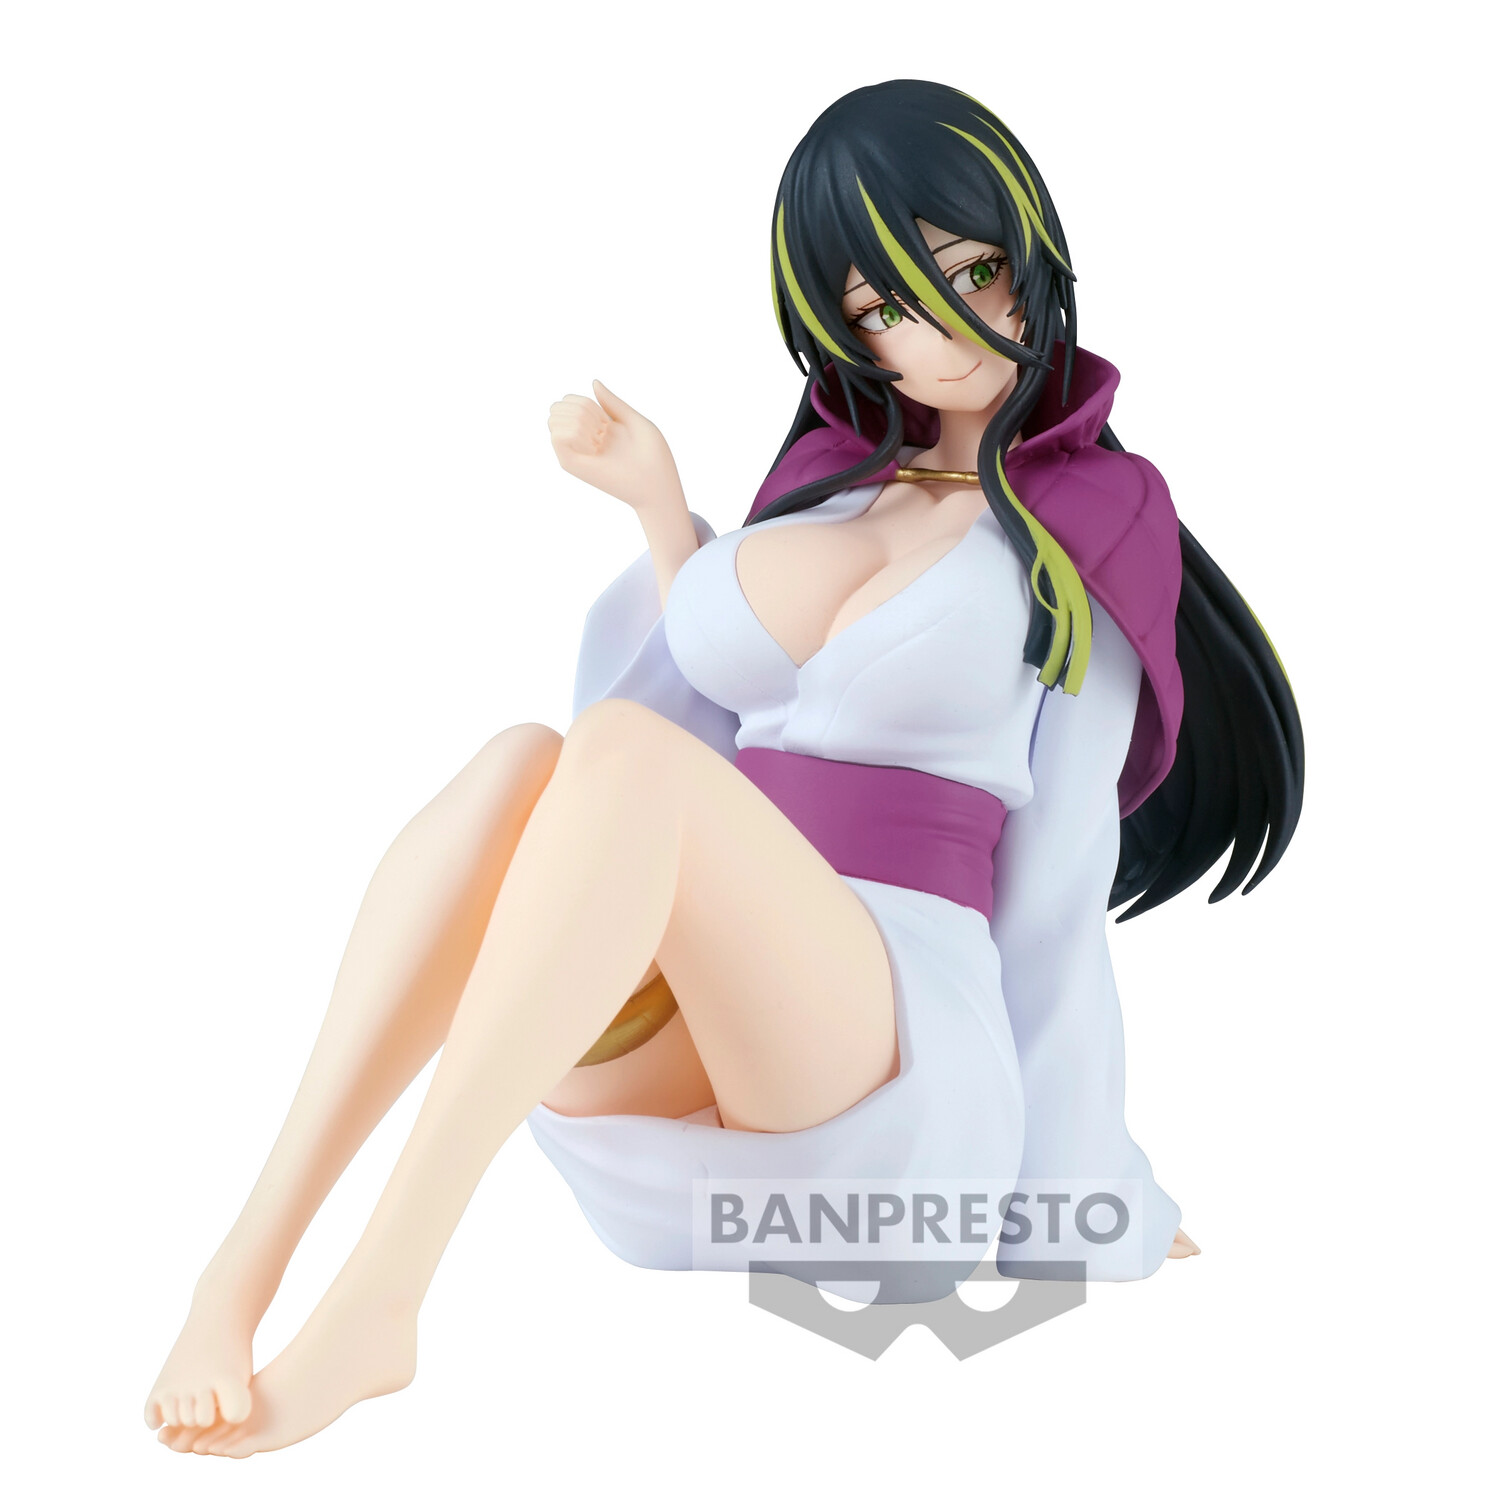 PRE-ORDER Banpresto That Time I Got Reincarnated as a Slime Relax Time Albis